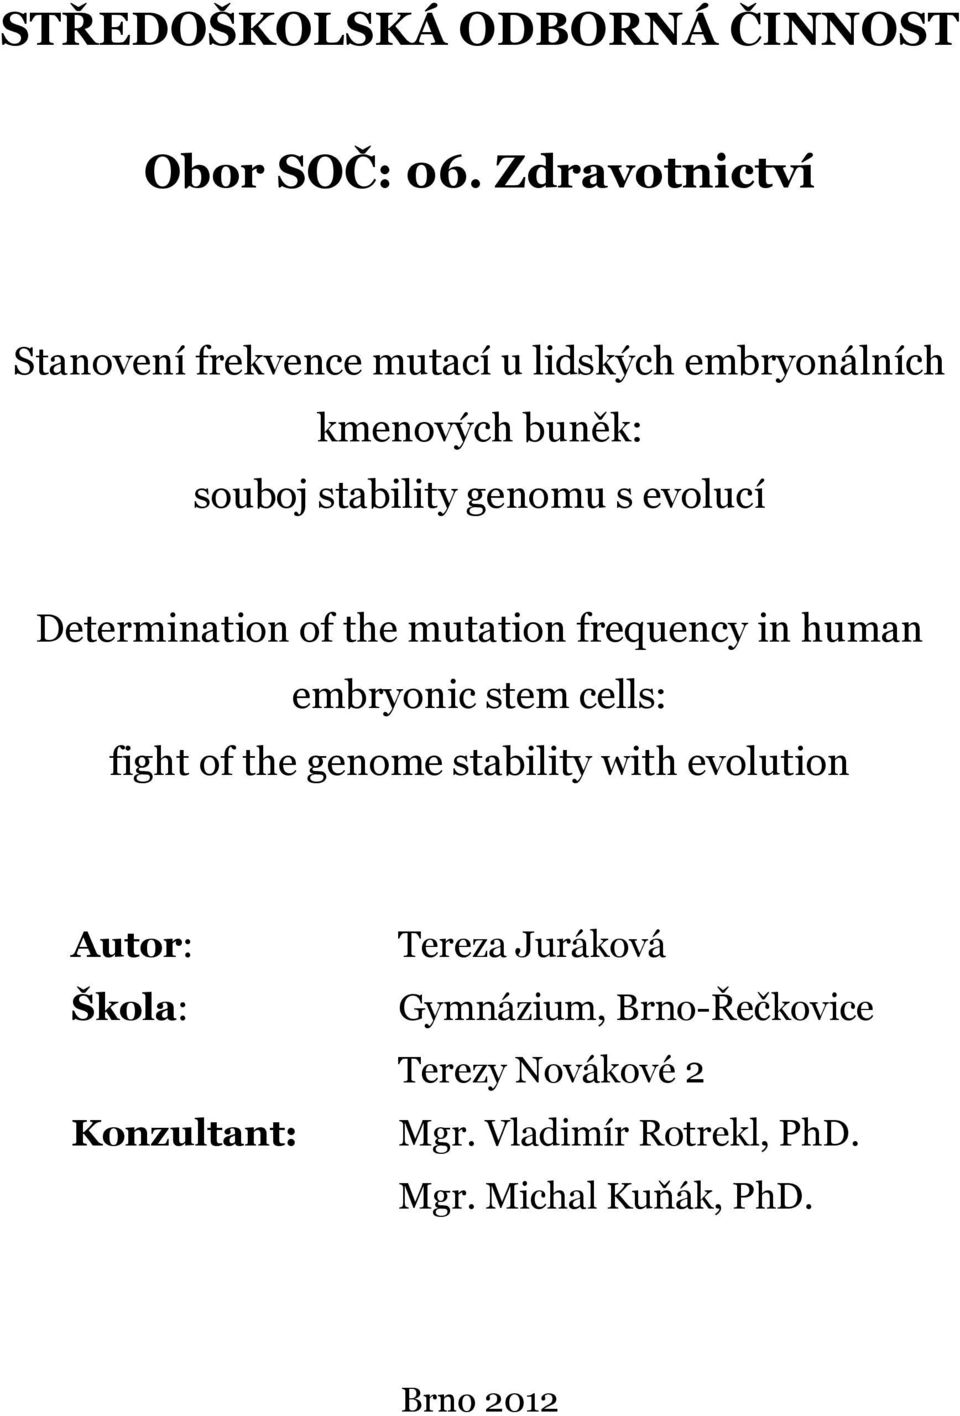 genomu s evolucí Determination of the mutation frequency in human embryonic stem cells: fight of the